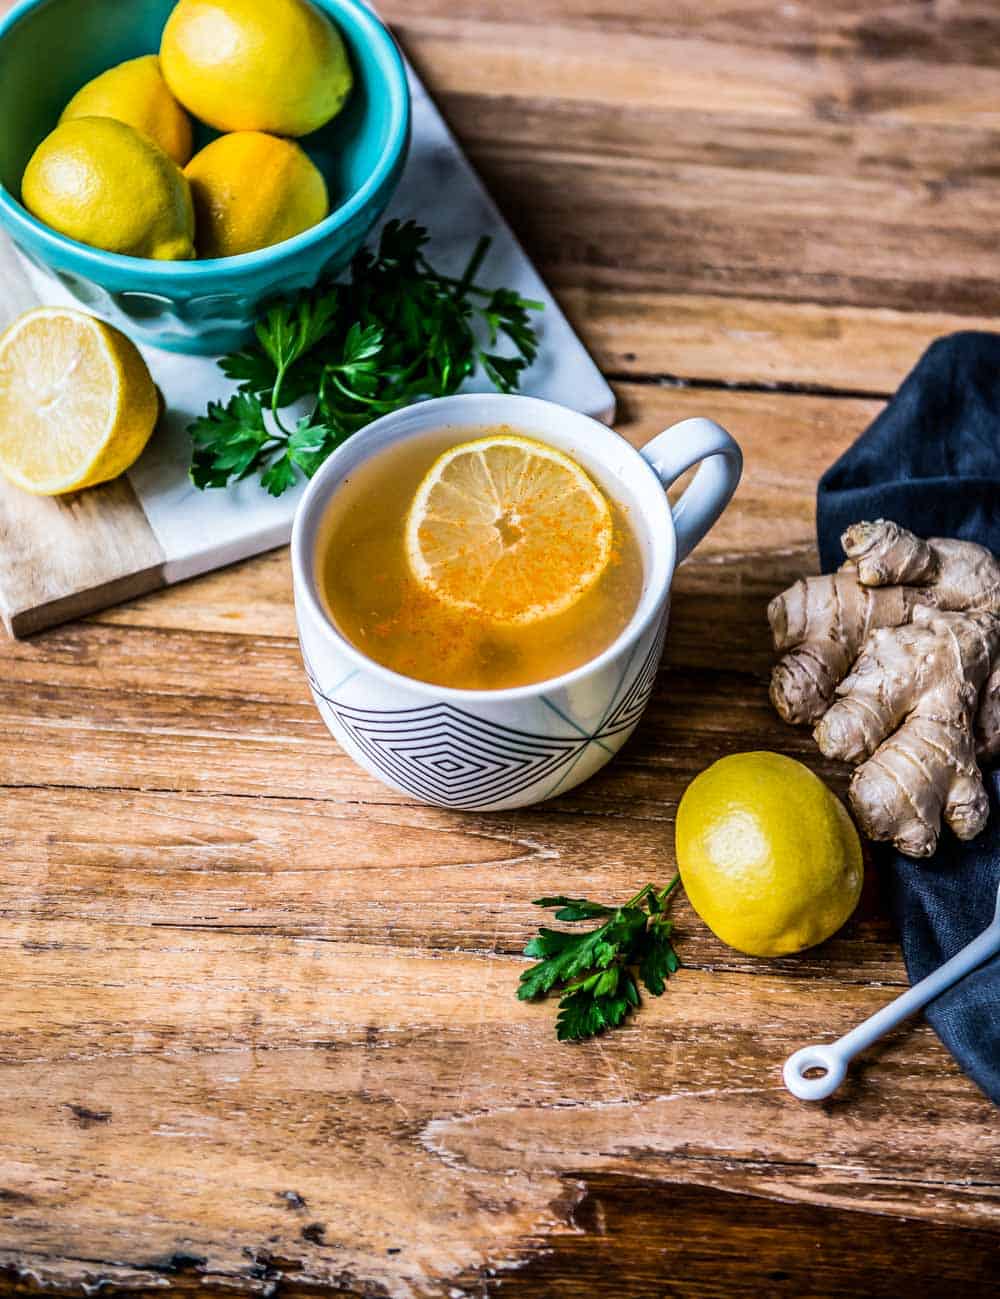 this mug of morning tonic included in our best drinks for weight loss list includes lemon, ginger, parsley, and cayenne.